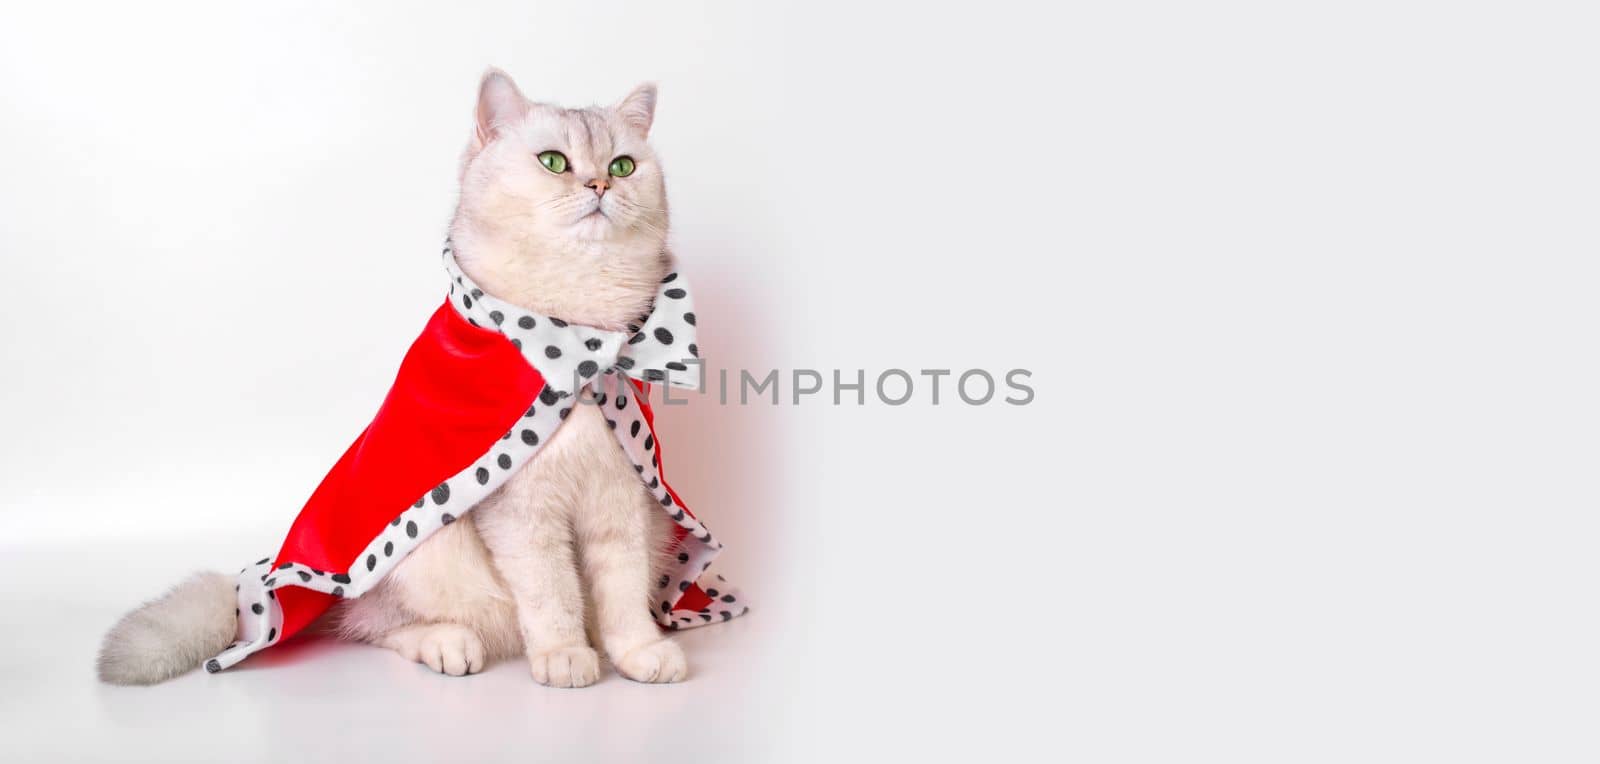 A wide banner with beautiful white cat in red mantle, sitting on a white background by Zakharova